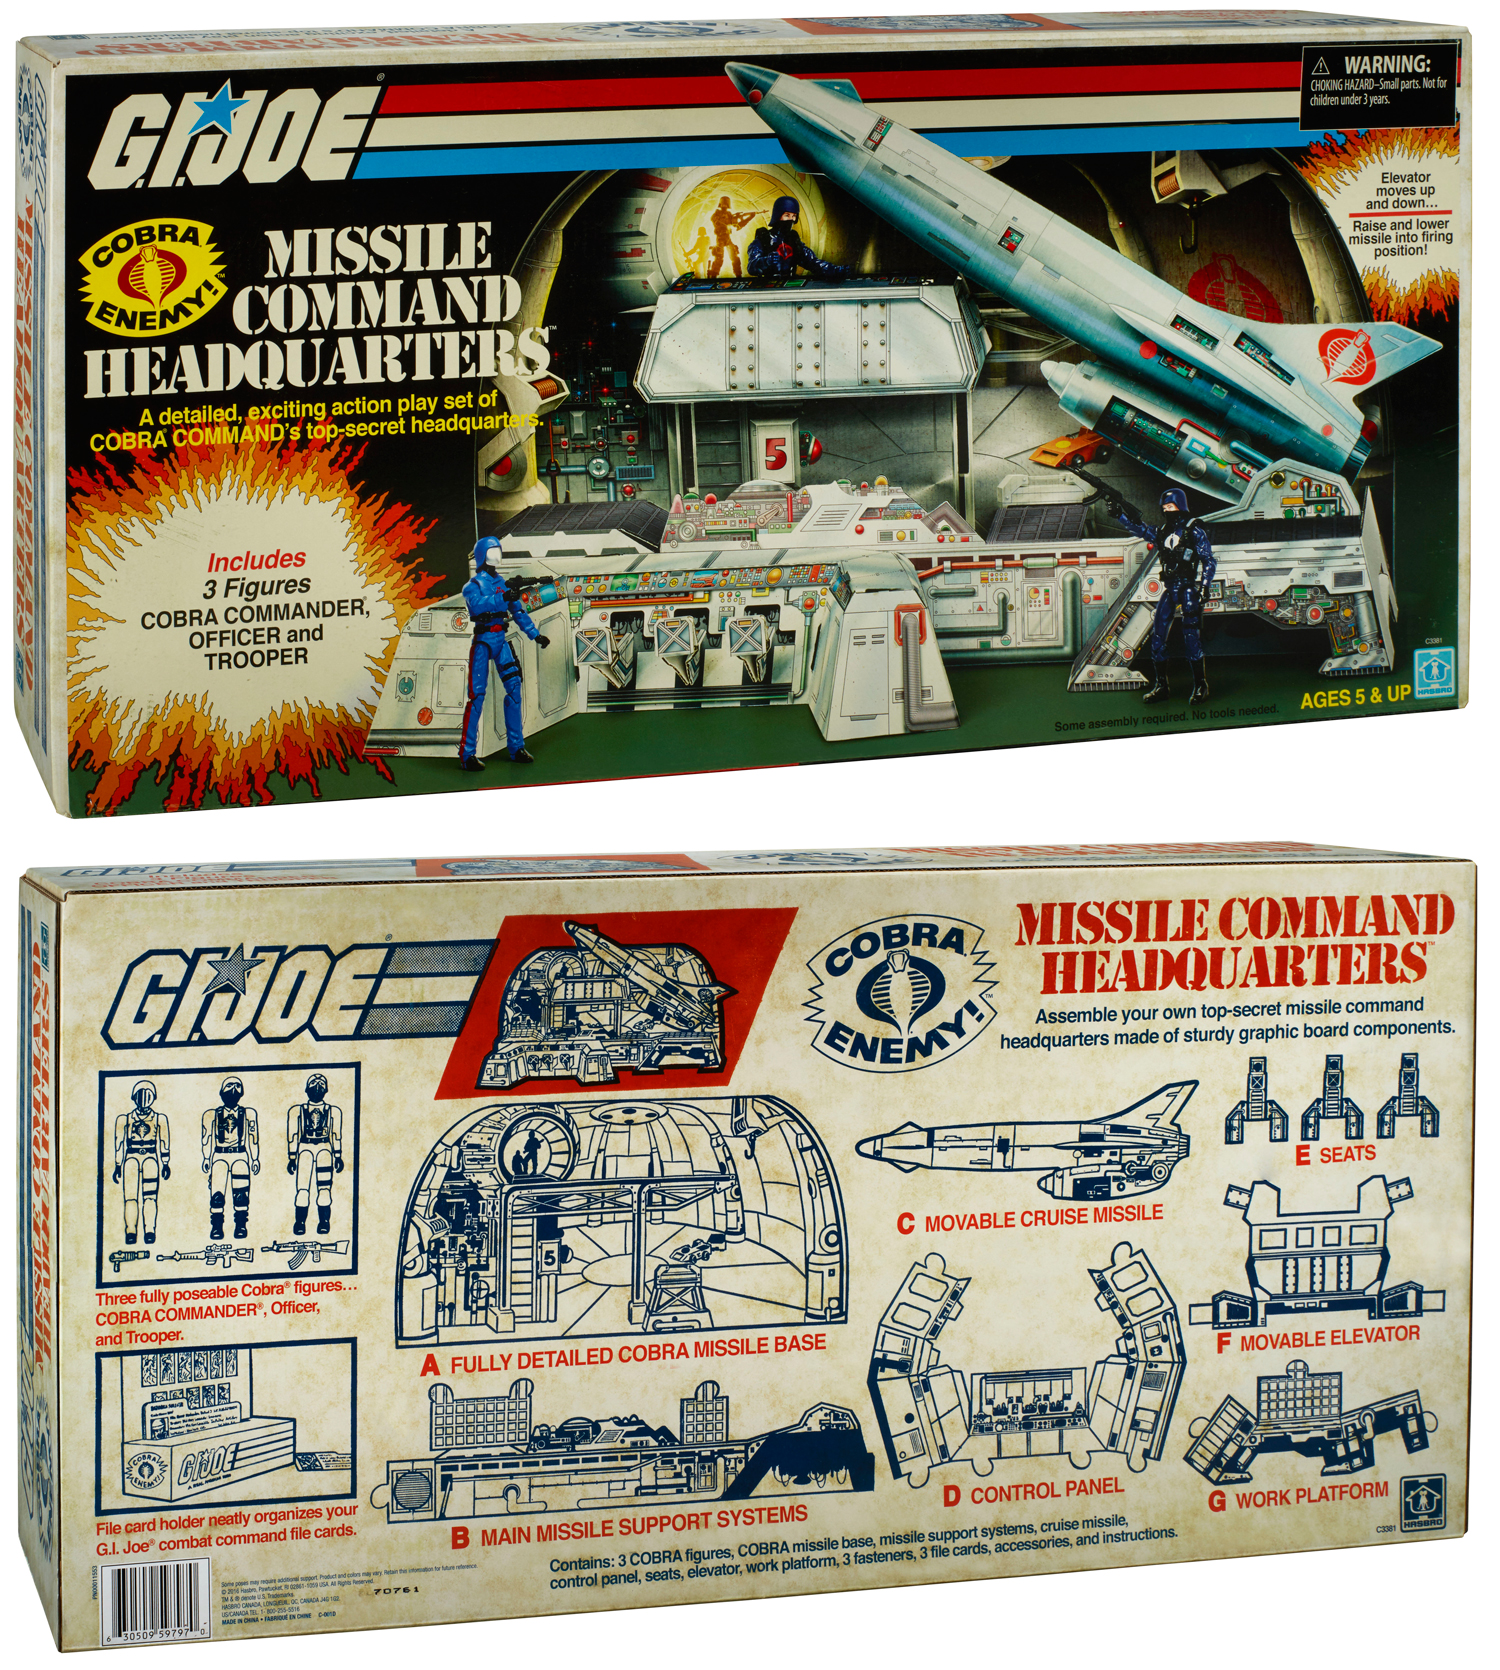 One Of The Oldest And Rarest GI Joe Playsets Is Returning As A San Diego Comic-Con Exclusive